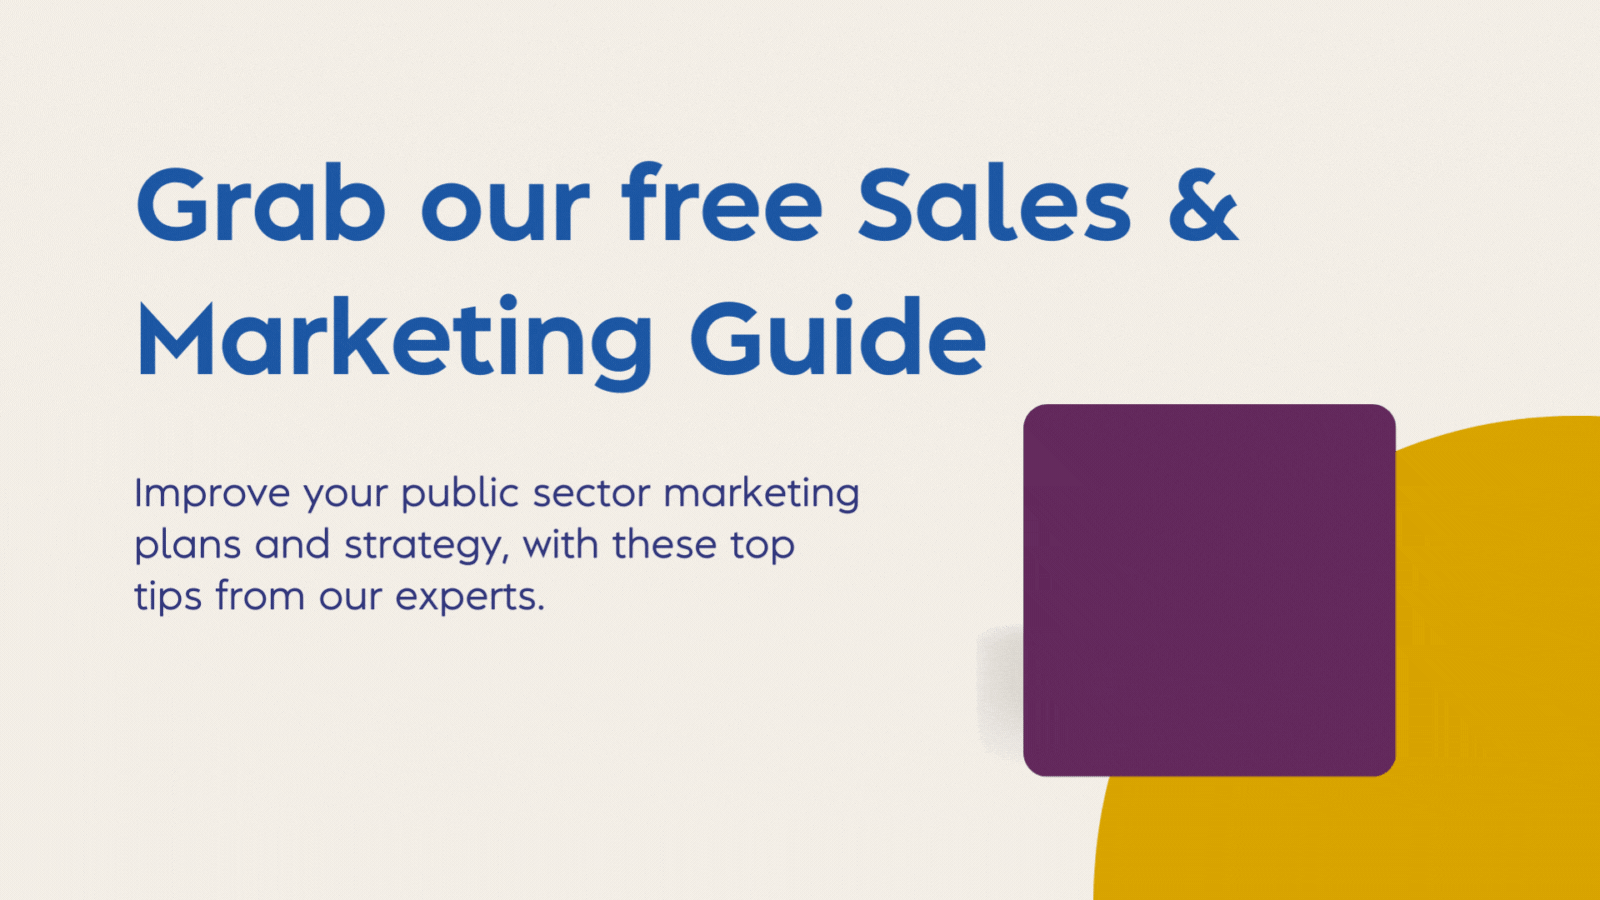 Sales & Marketing Guide 1